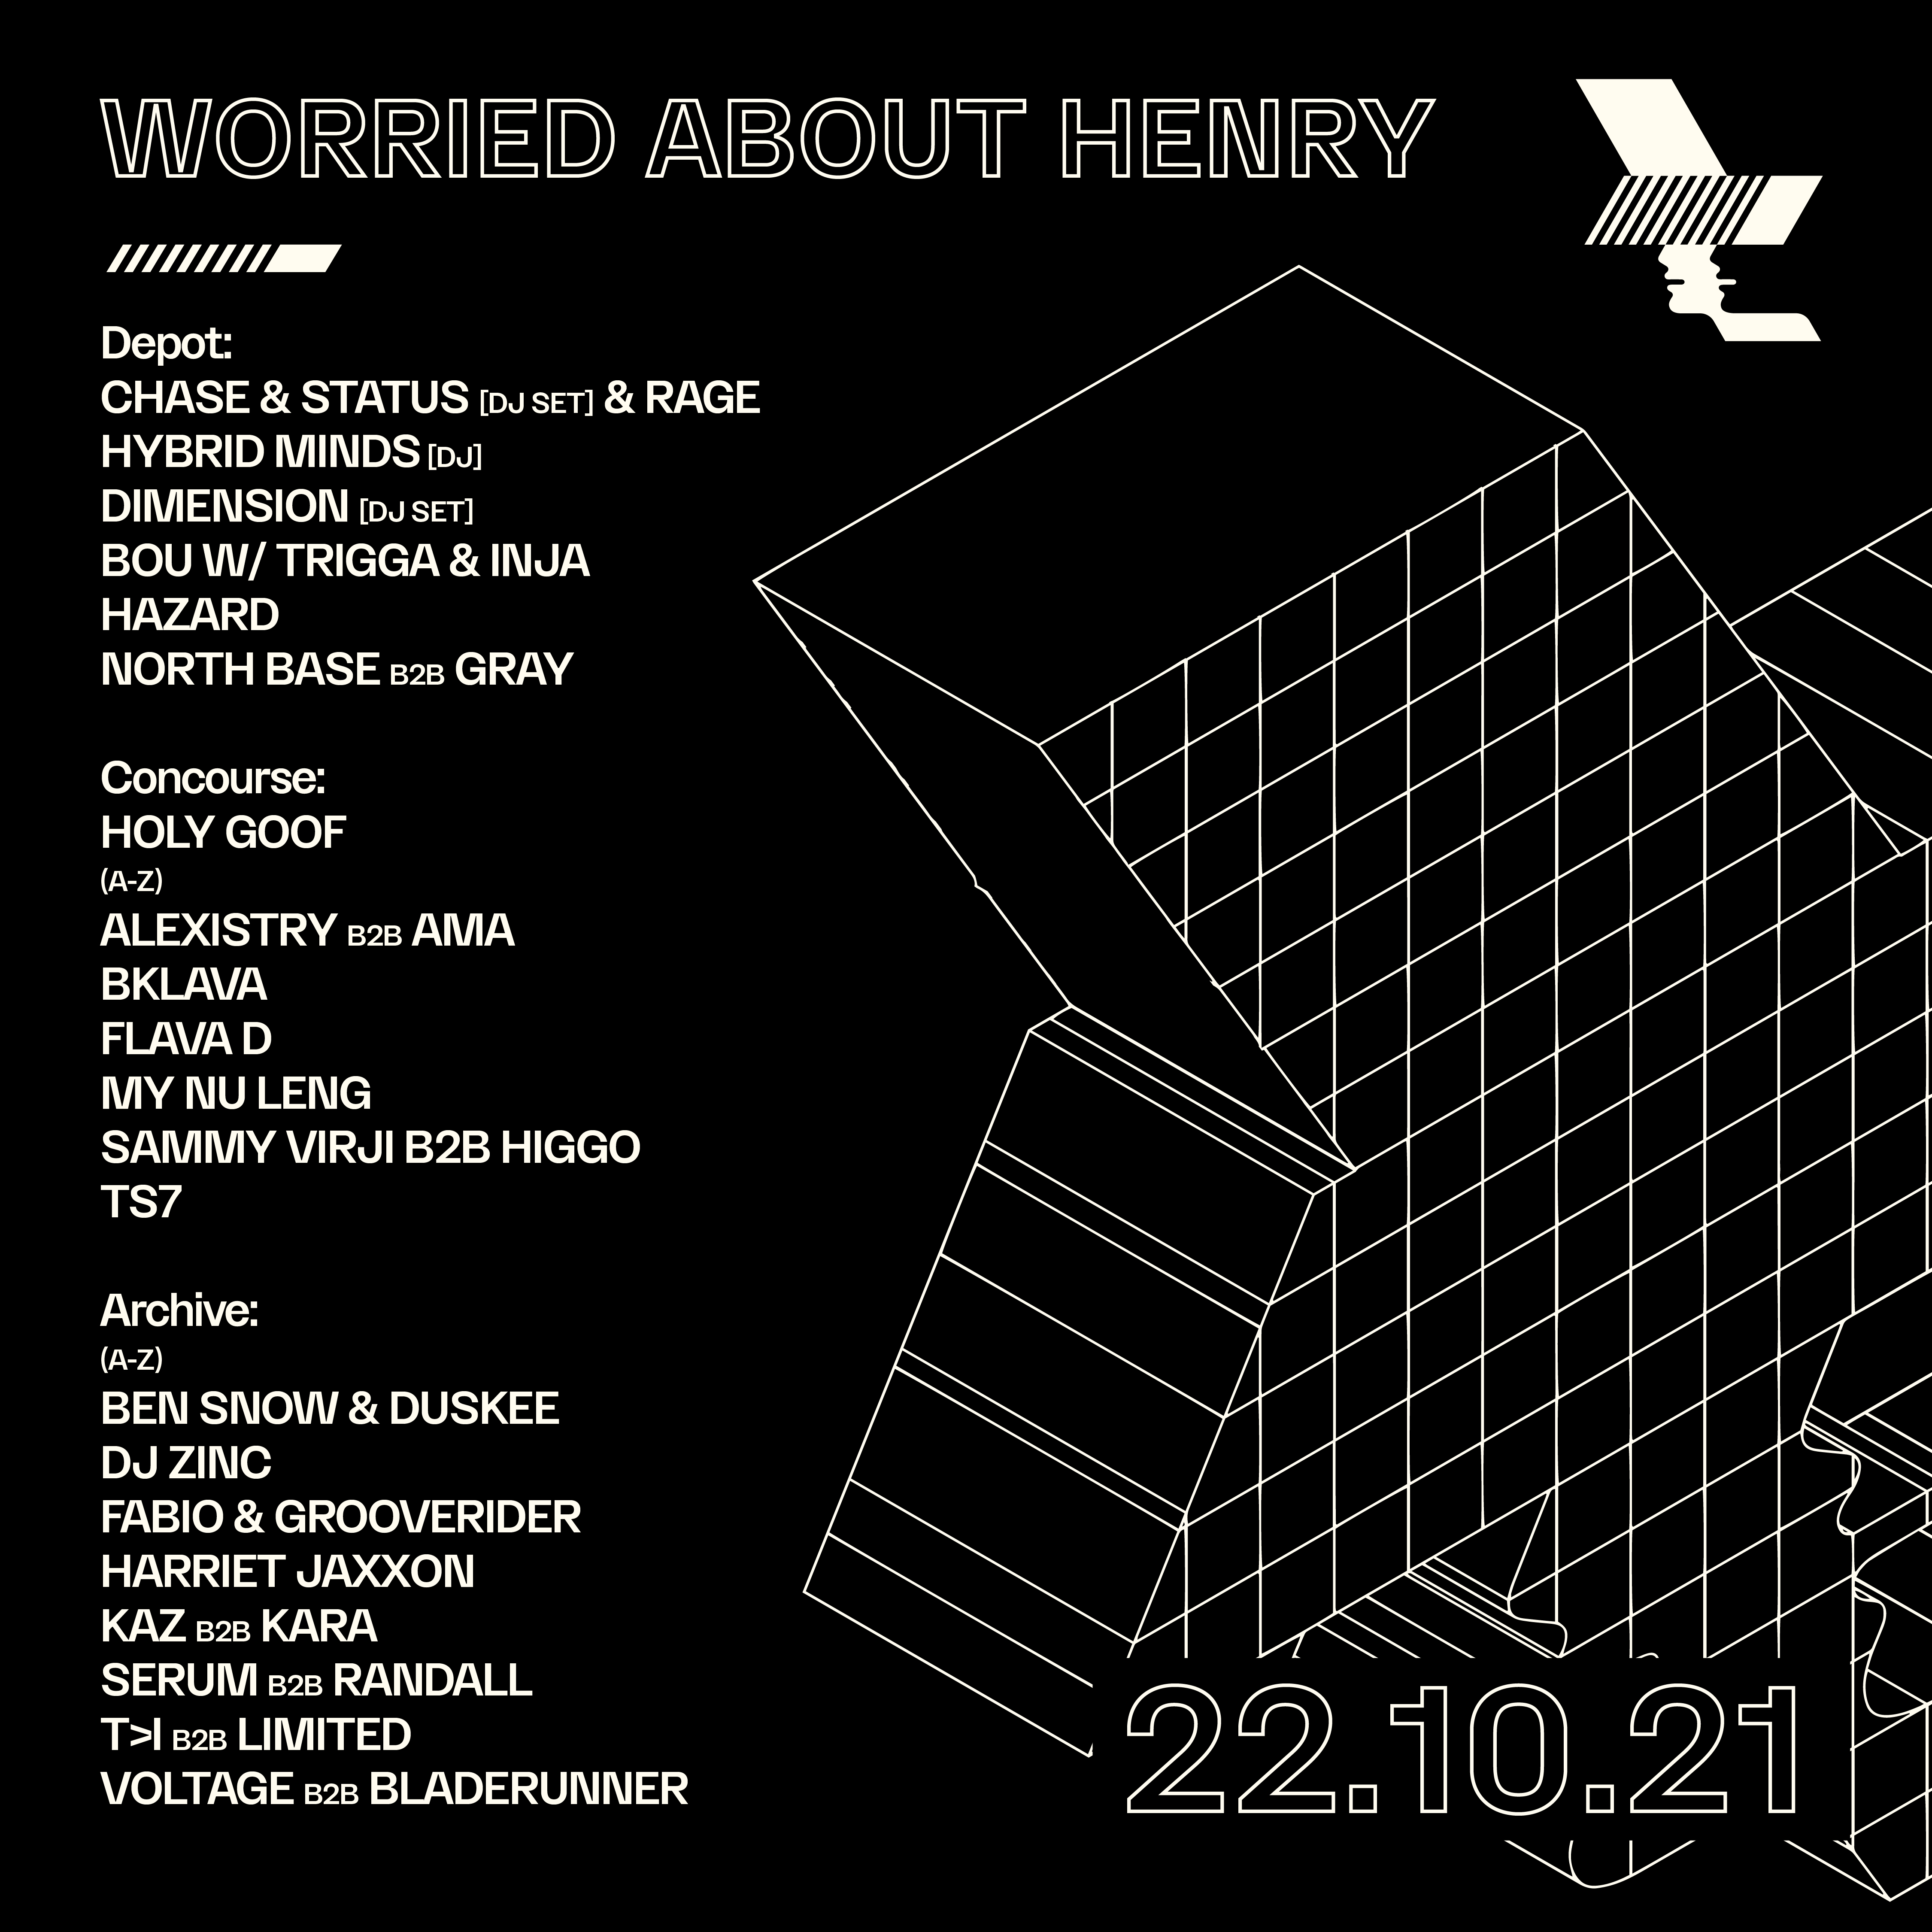 Announcing our 3 new shows with The Warehouse Project